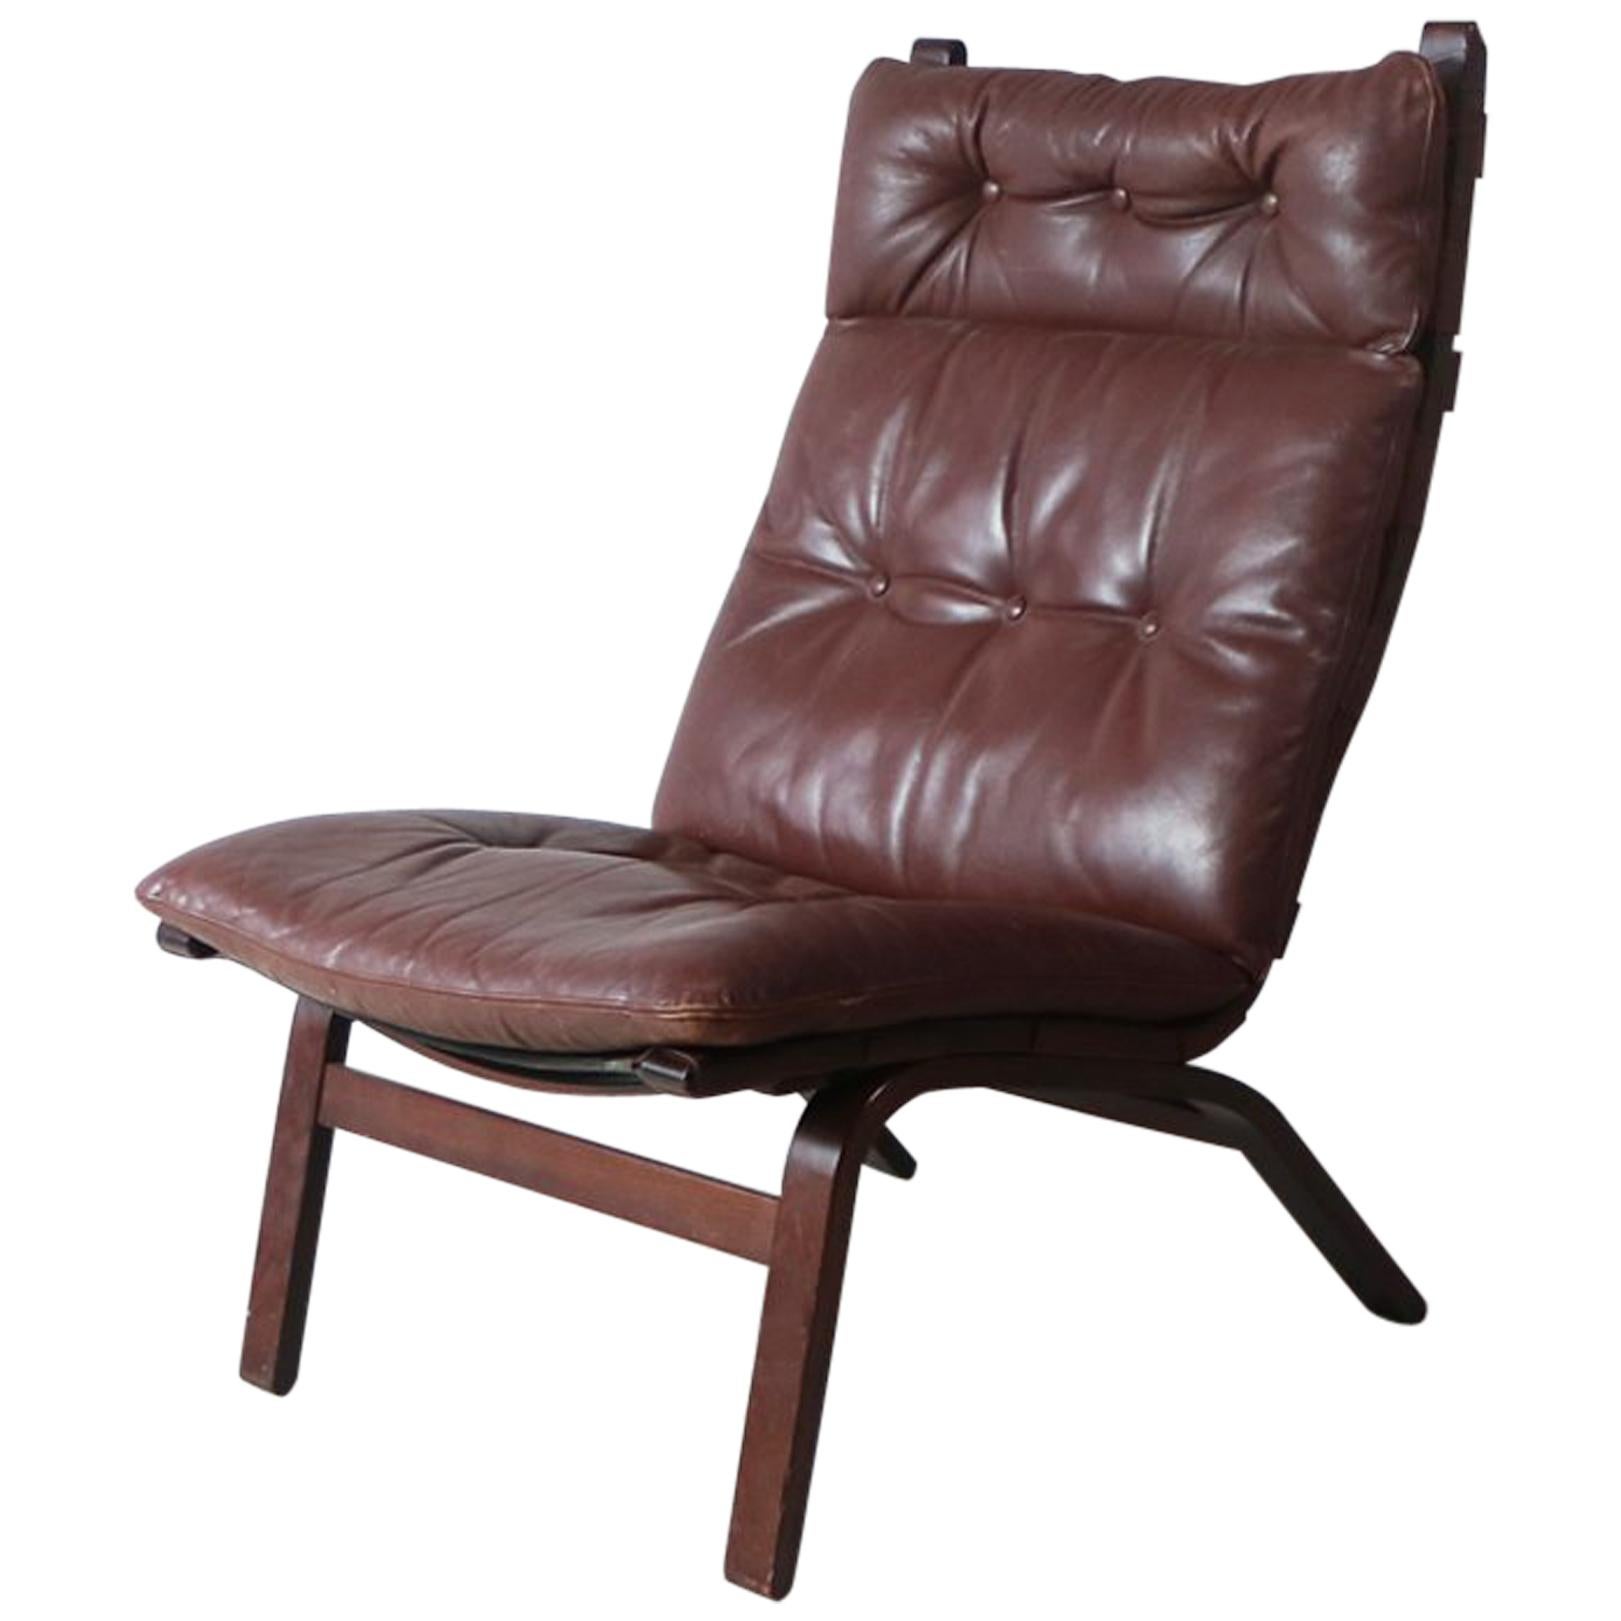 1970s Danish Midcentury Leather Lounge Chair For Sale